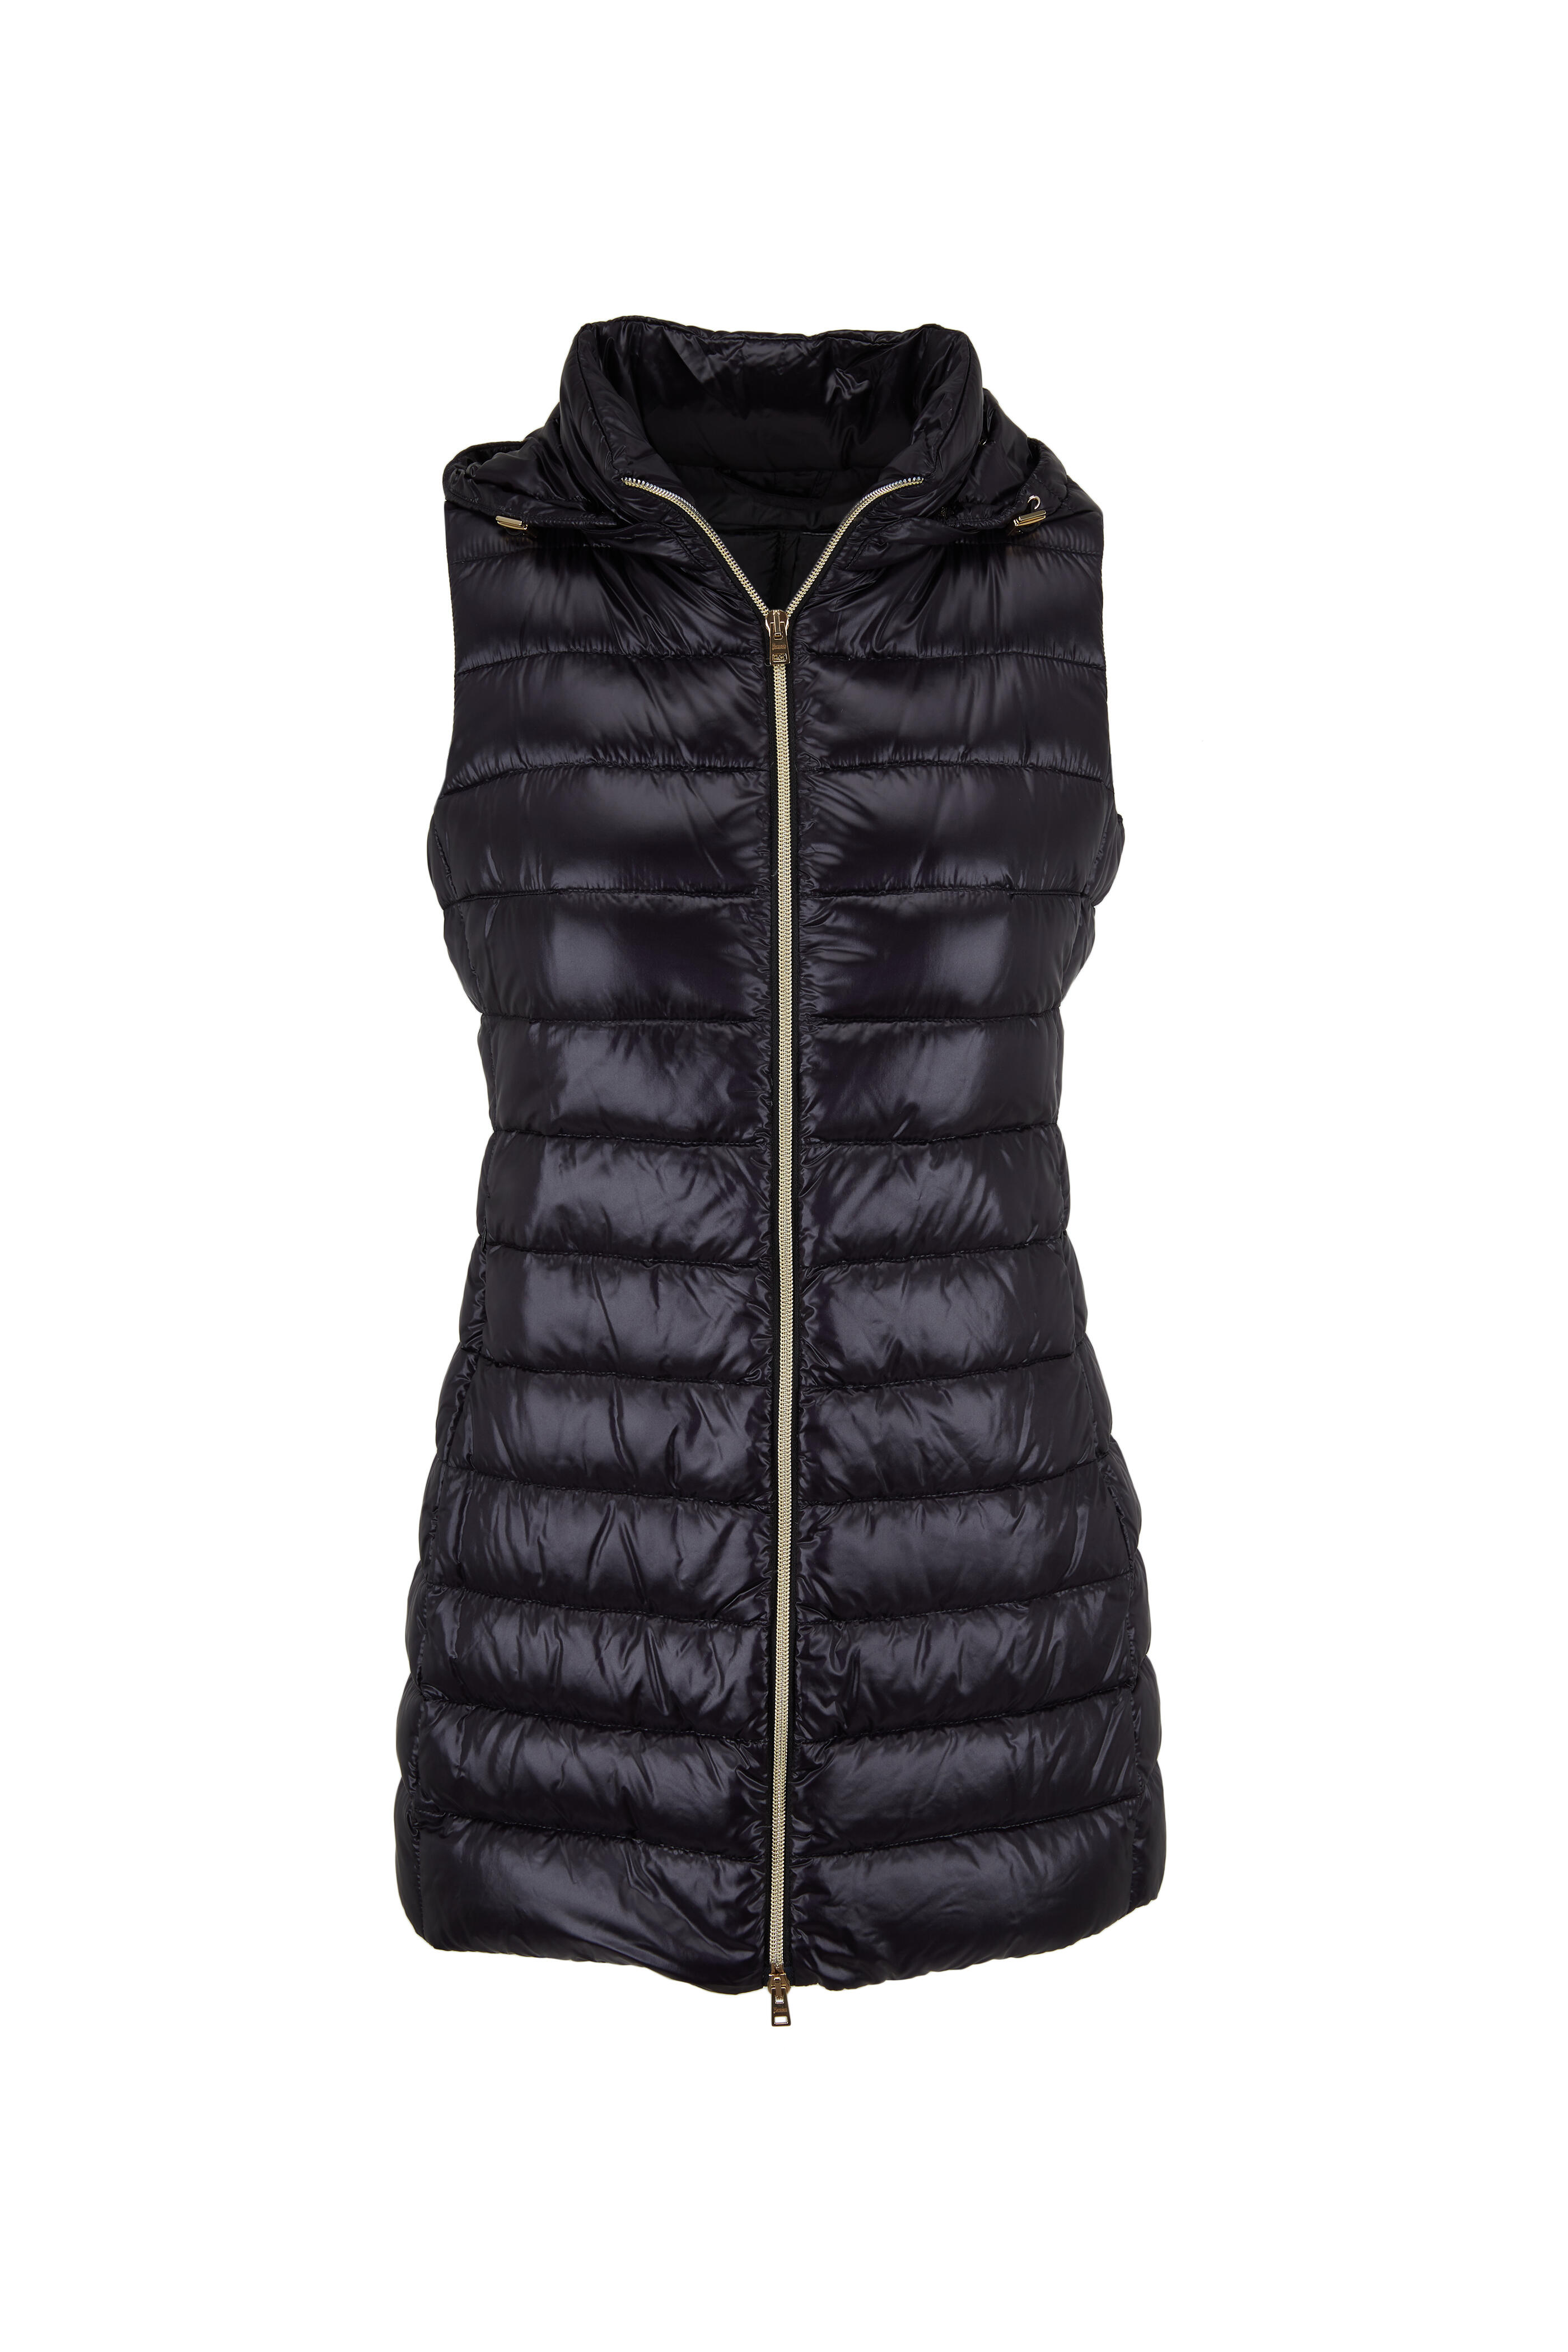 Herno - Black Nylon Fitted Long Puffer Vest | Mitchell Stores